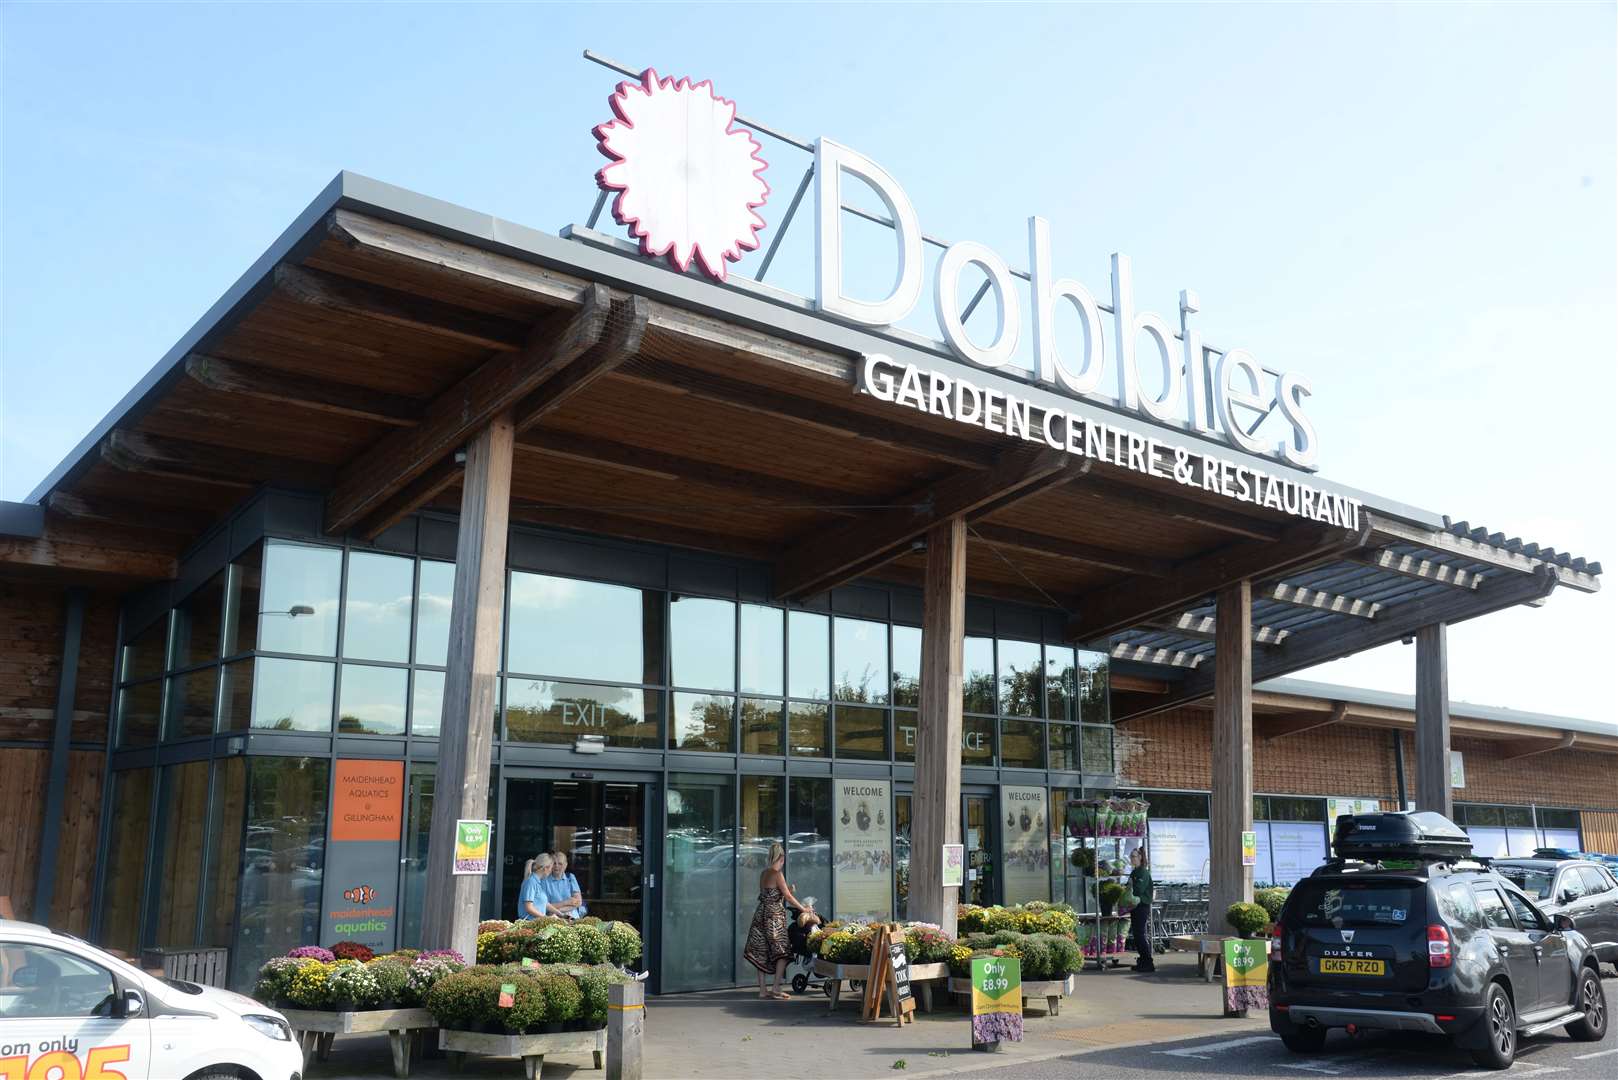 Waitrose foodhall to open at Dobbies Garden Centre in Gillingham